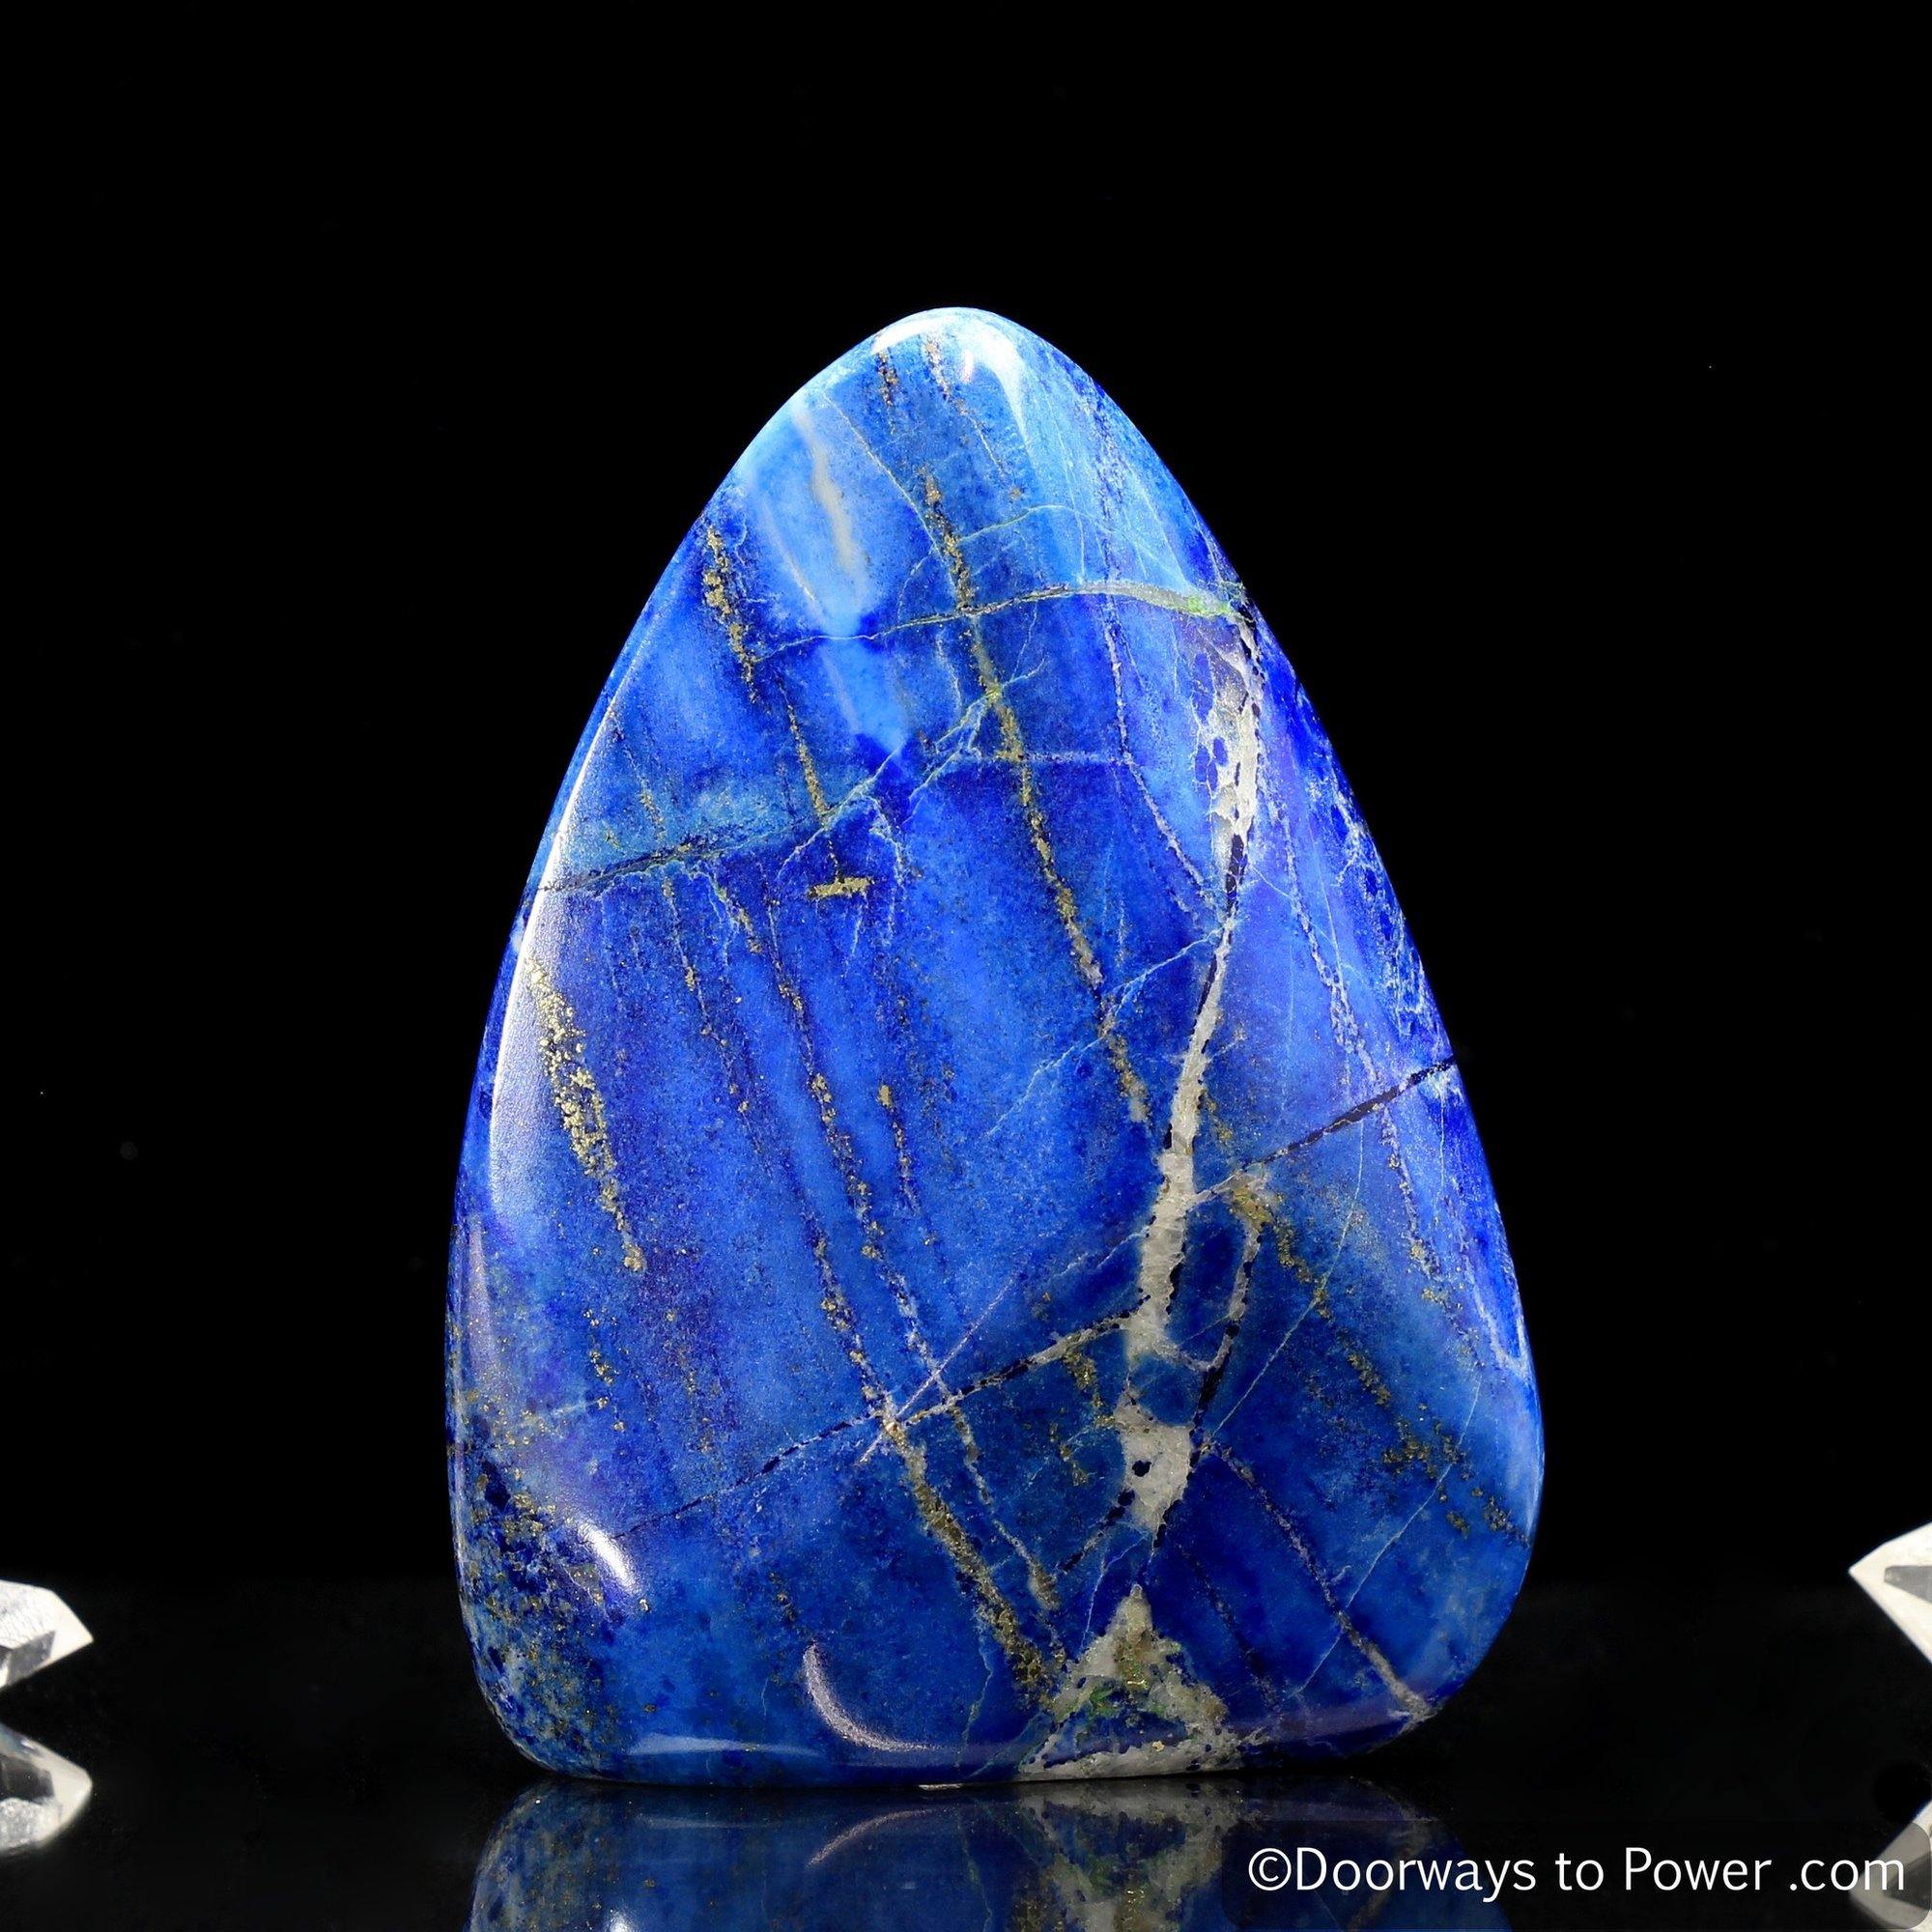 Lapis Lazuli Crystals: Stone of the Gods, used to cleanse, purify and purge the soul, body and mind.